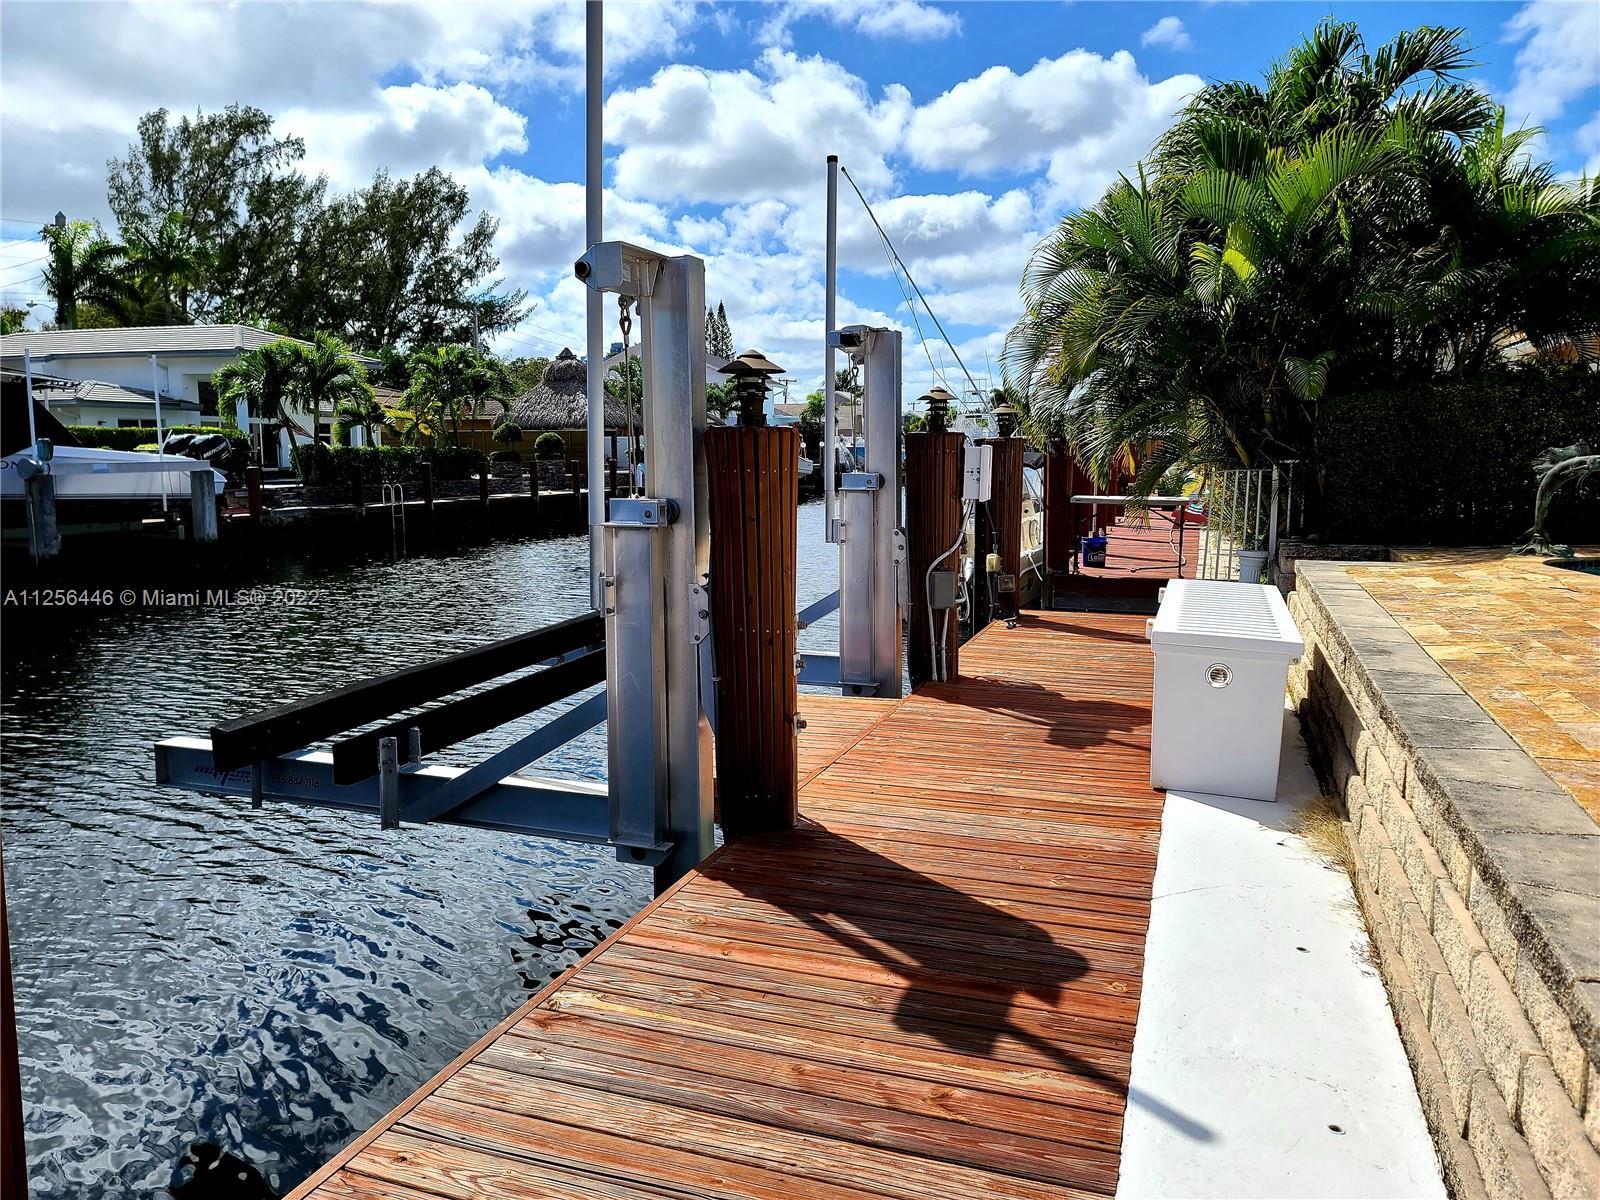 Boat Residence just a few houses from the intracoastal with direct ocean access no fixed brights, ho